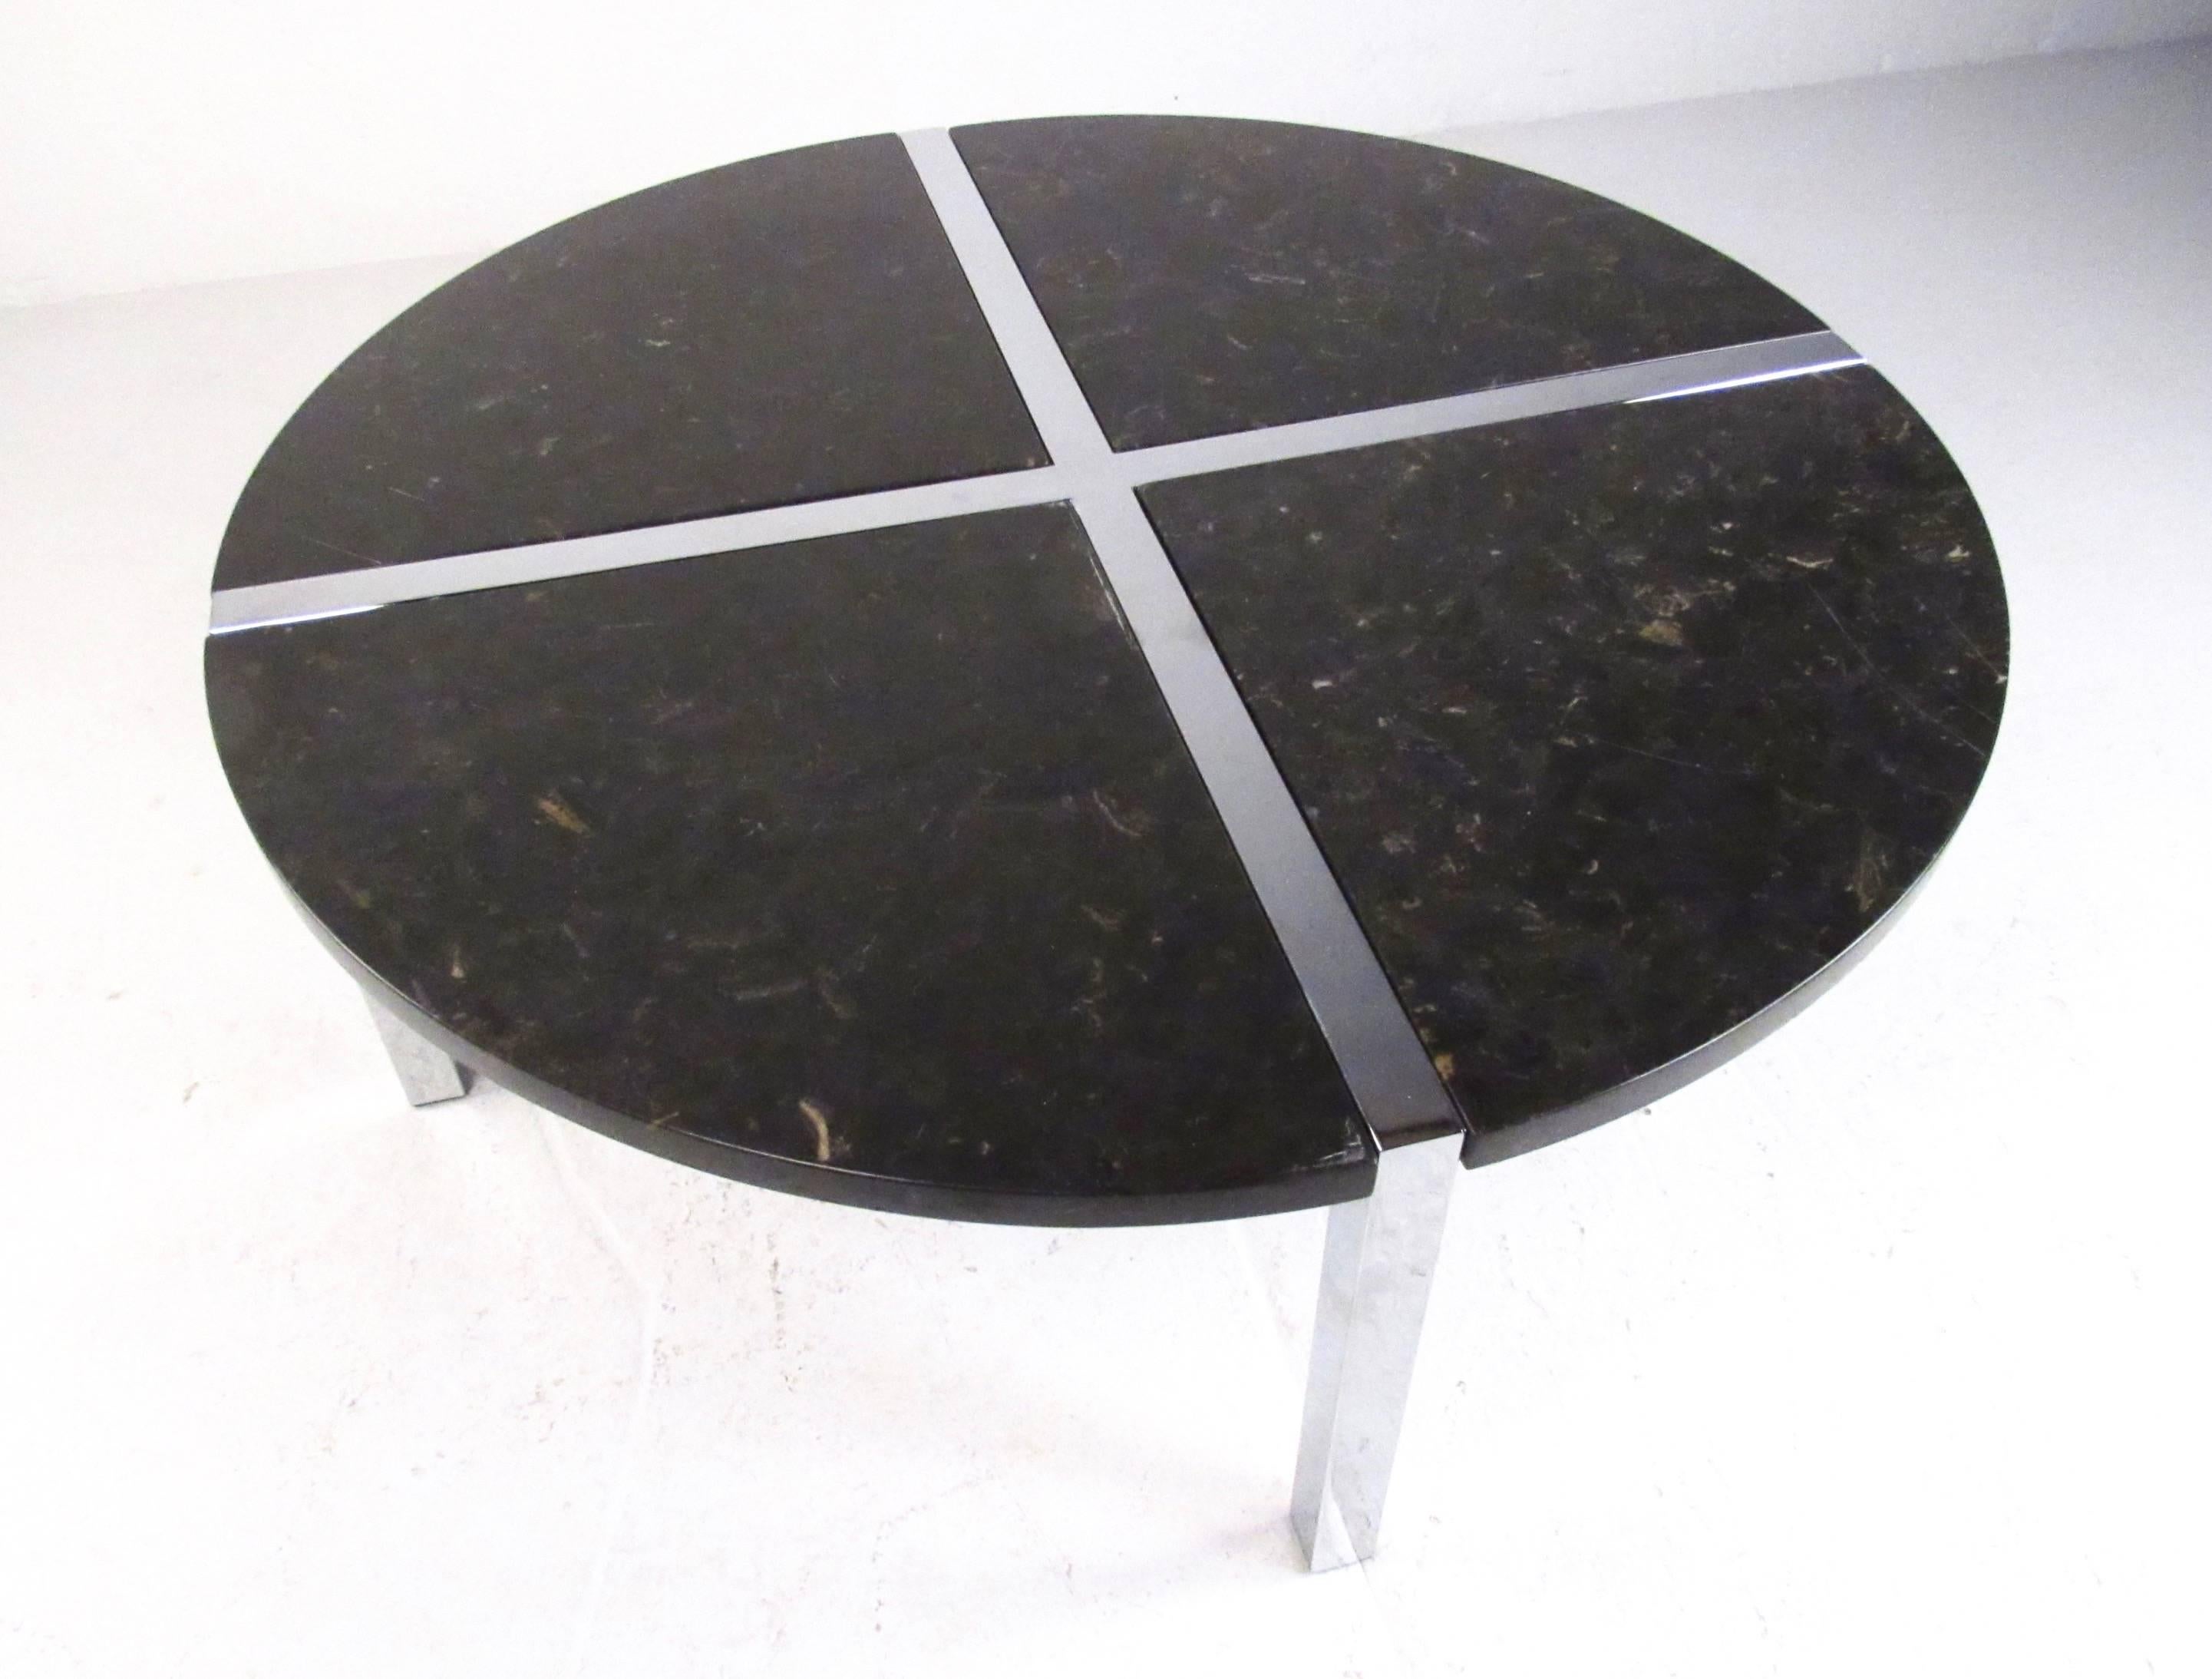 This two tone modern chrome coffee table features sturdy construction and consists of chrome frame with marble slab tops. Stylish circular table makes an impressive centrepiece to any seating area, home or business. Please confirm item location (NY